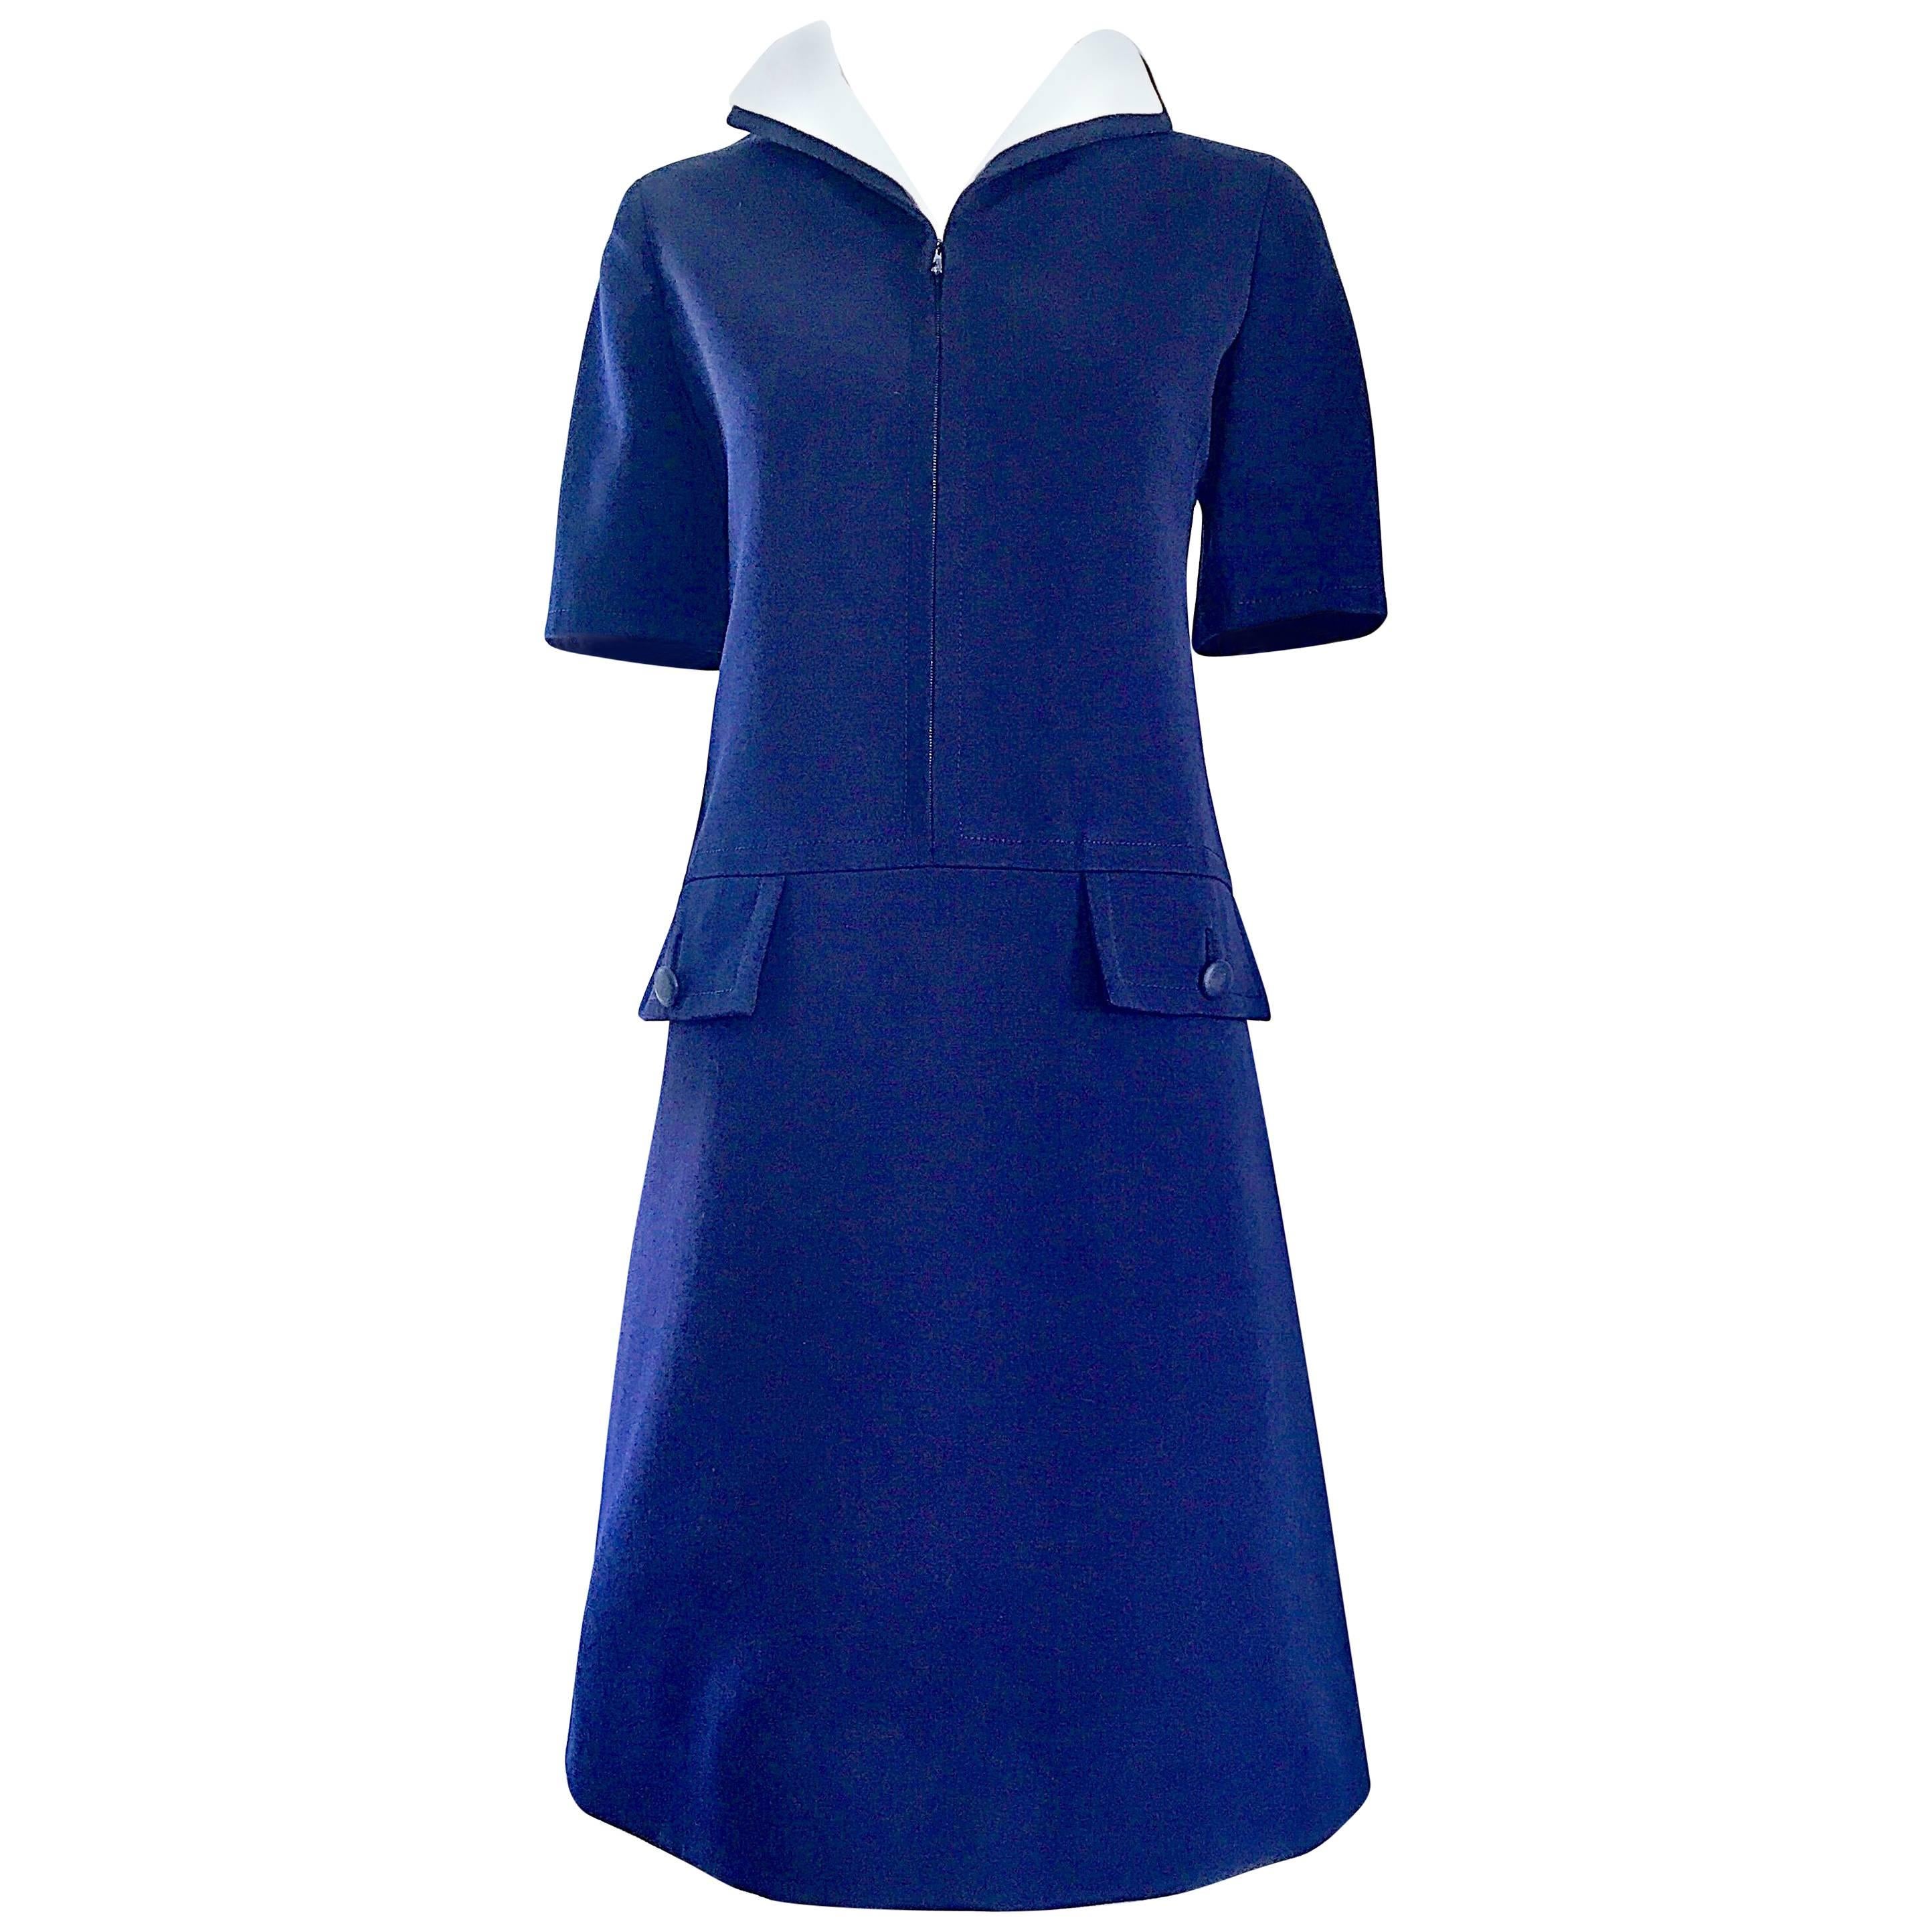 Yves Saint Laurent Haute Couture Navy Blue and White Nautical Dress, 1960s